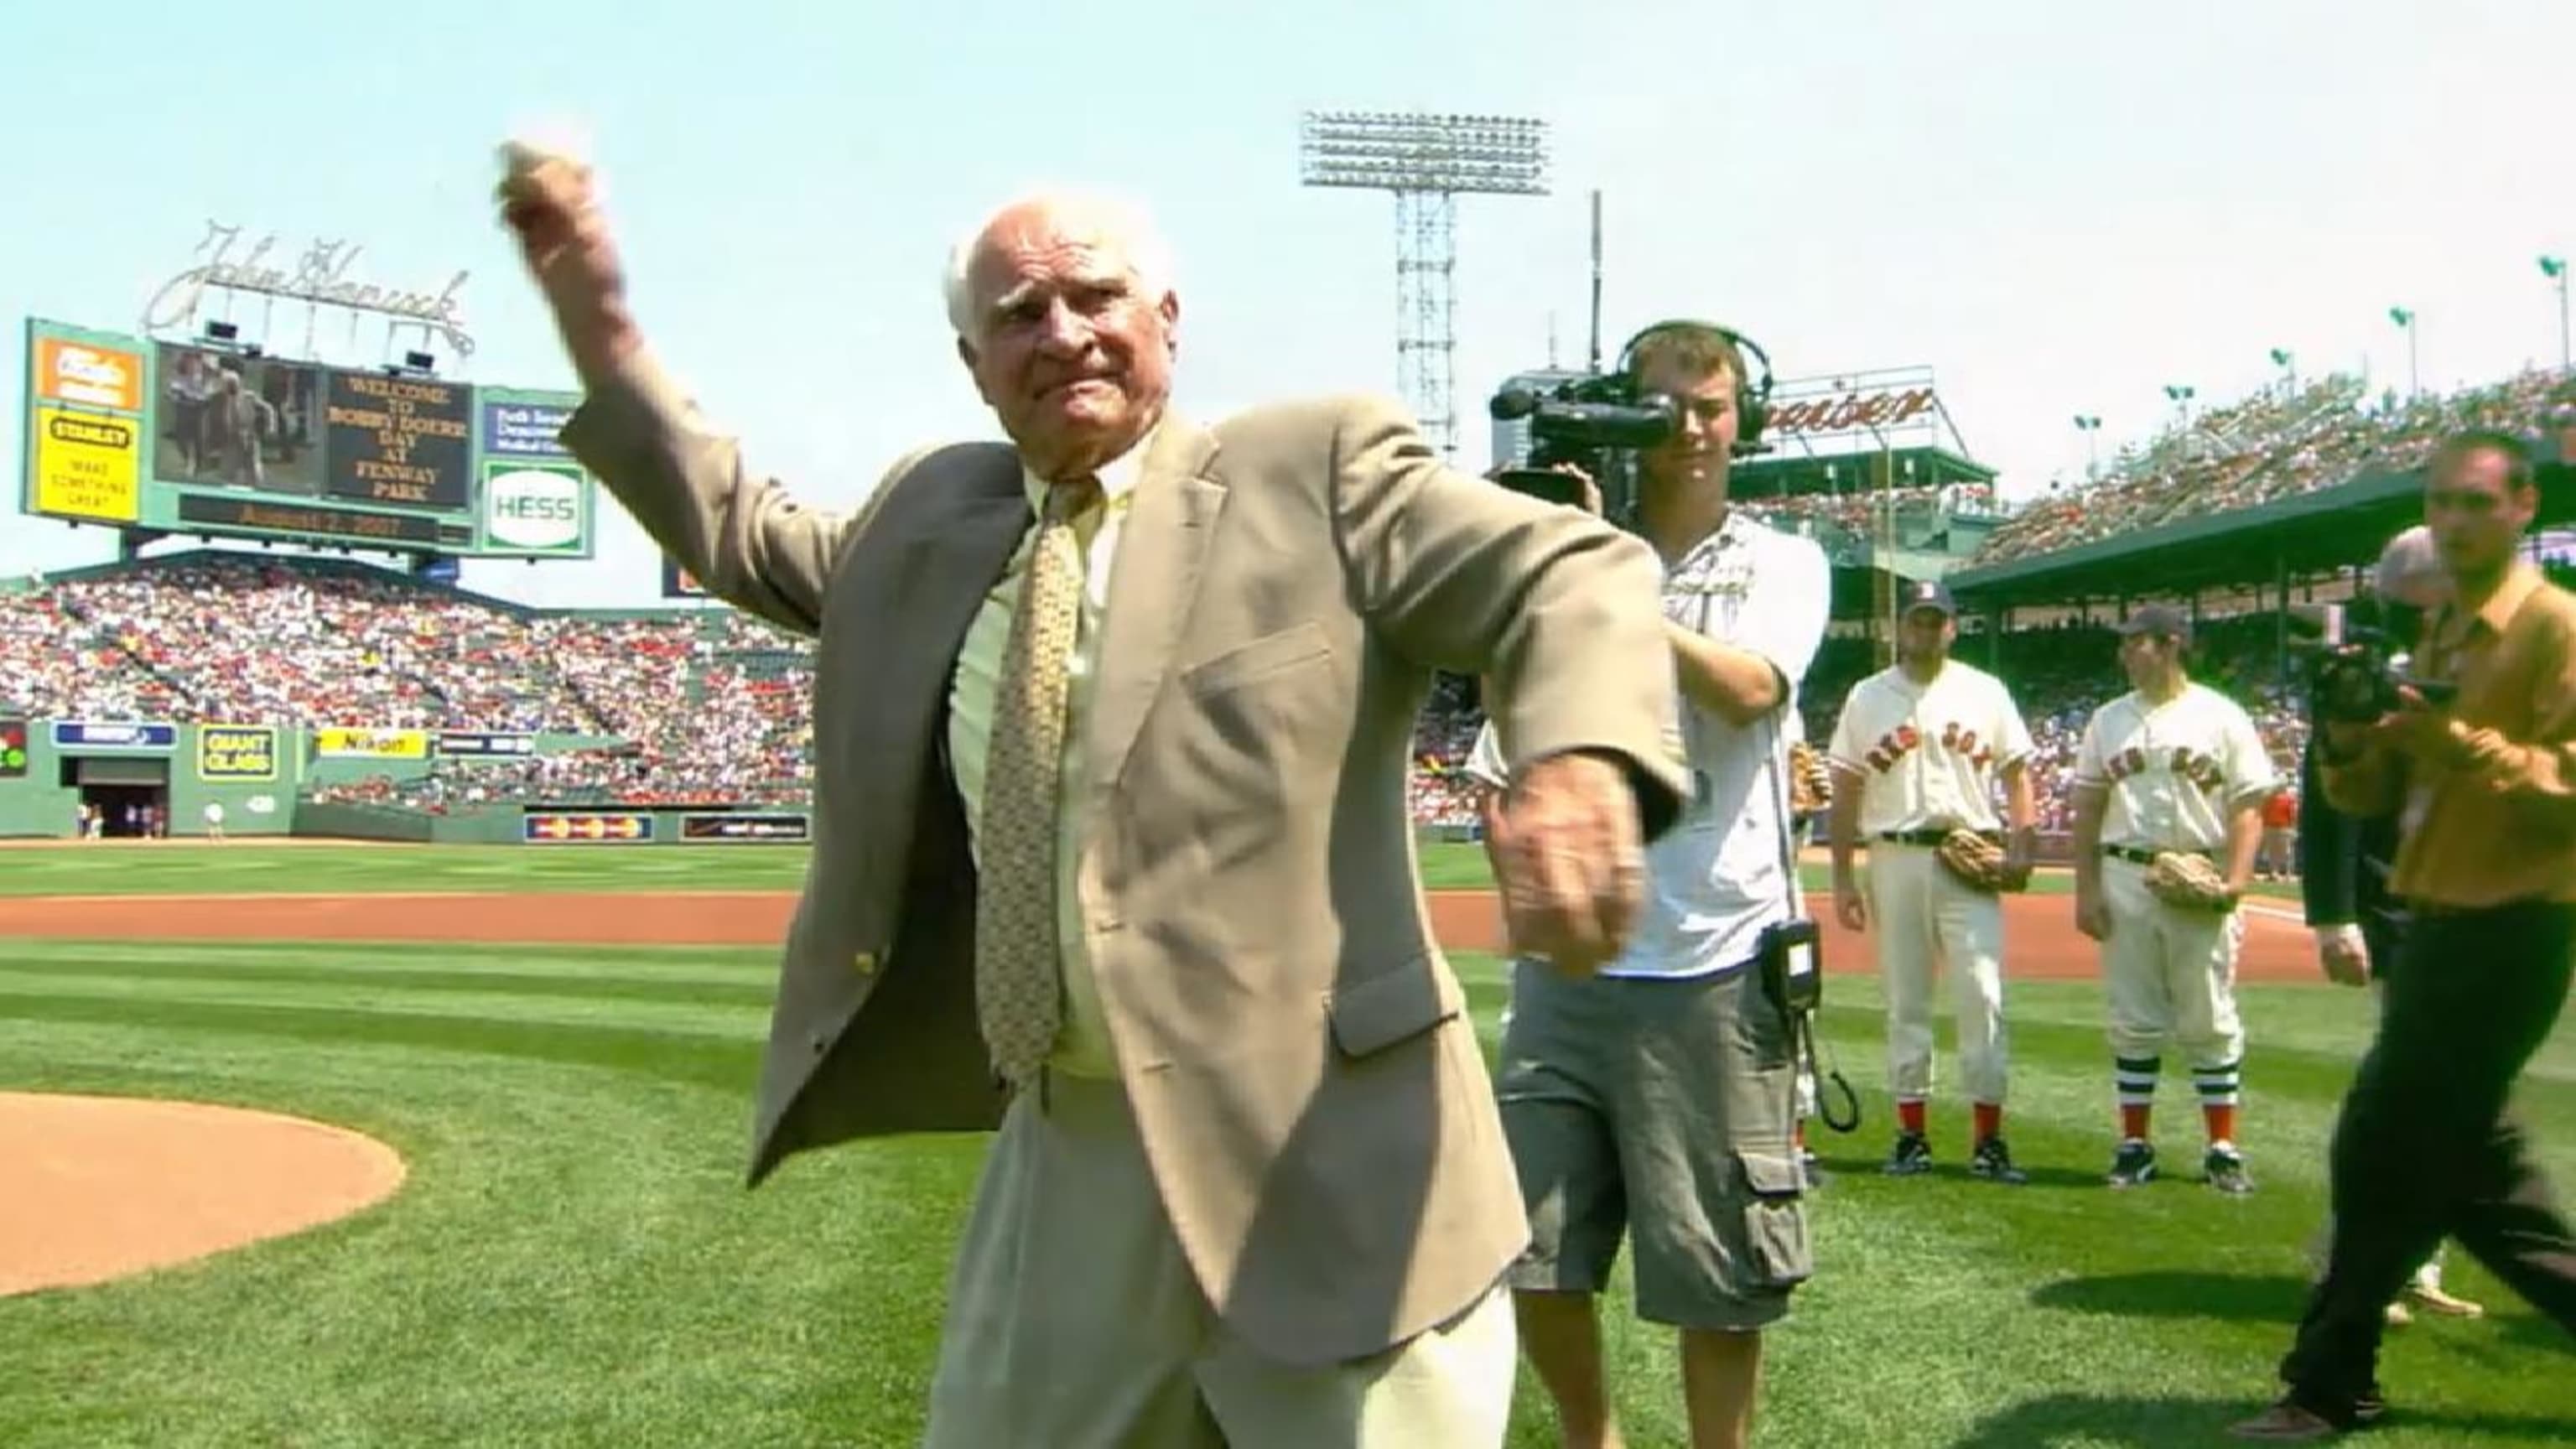 Bobby Doerr, Hall of Famer and Boston Red Sox legend, dies at 99